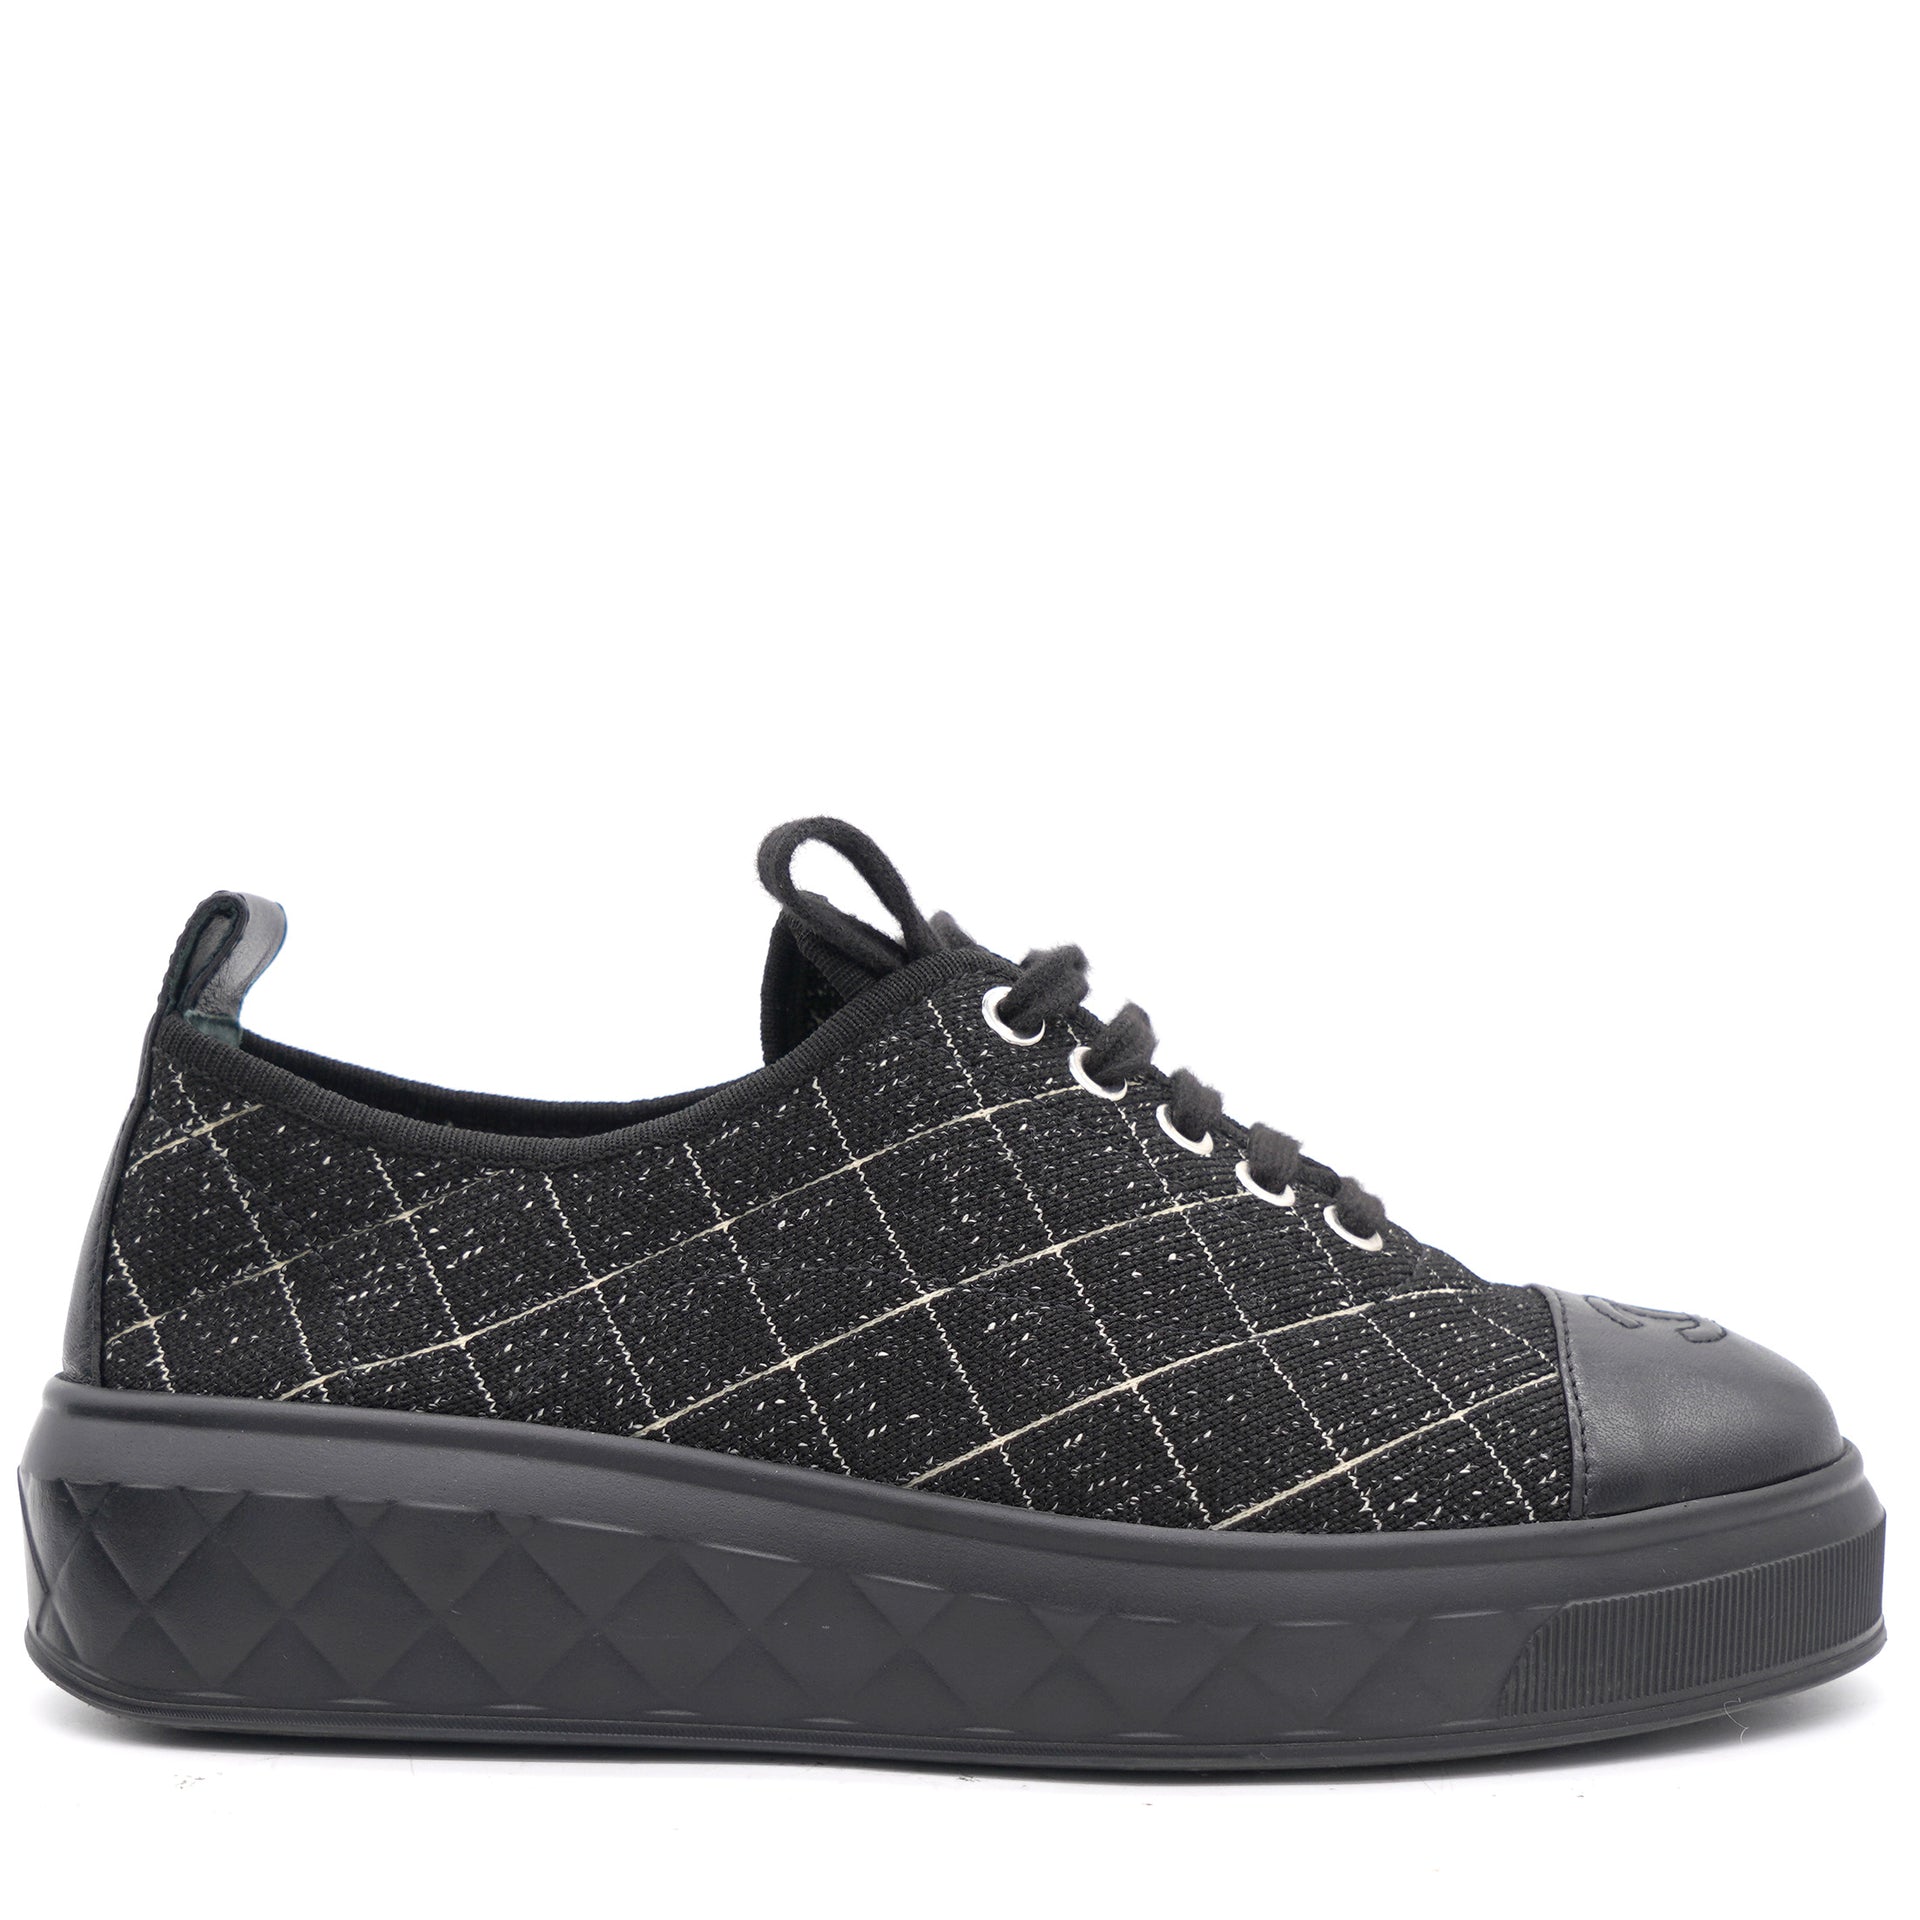 Multicolor Tweed and Black Leather CC Low Top Sneakers 36.5